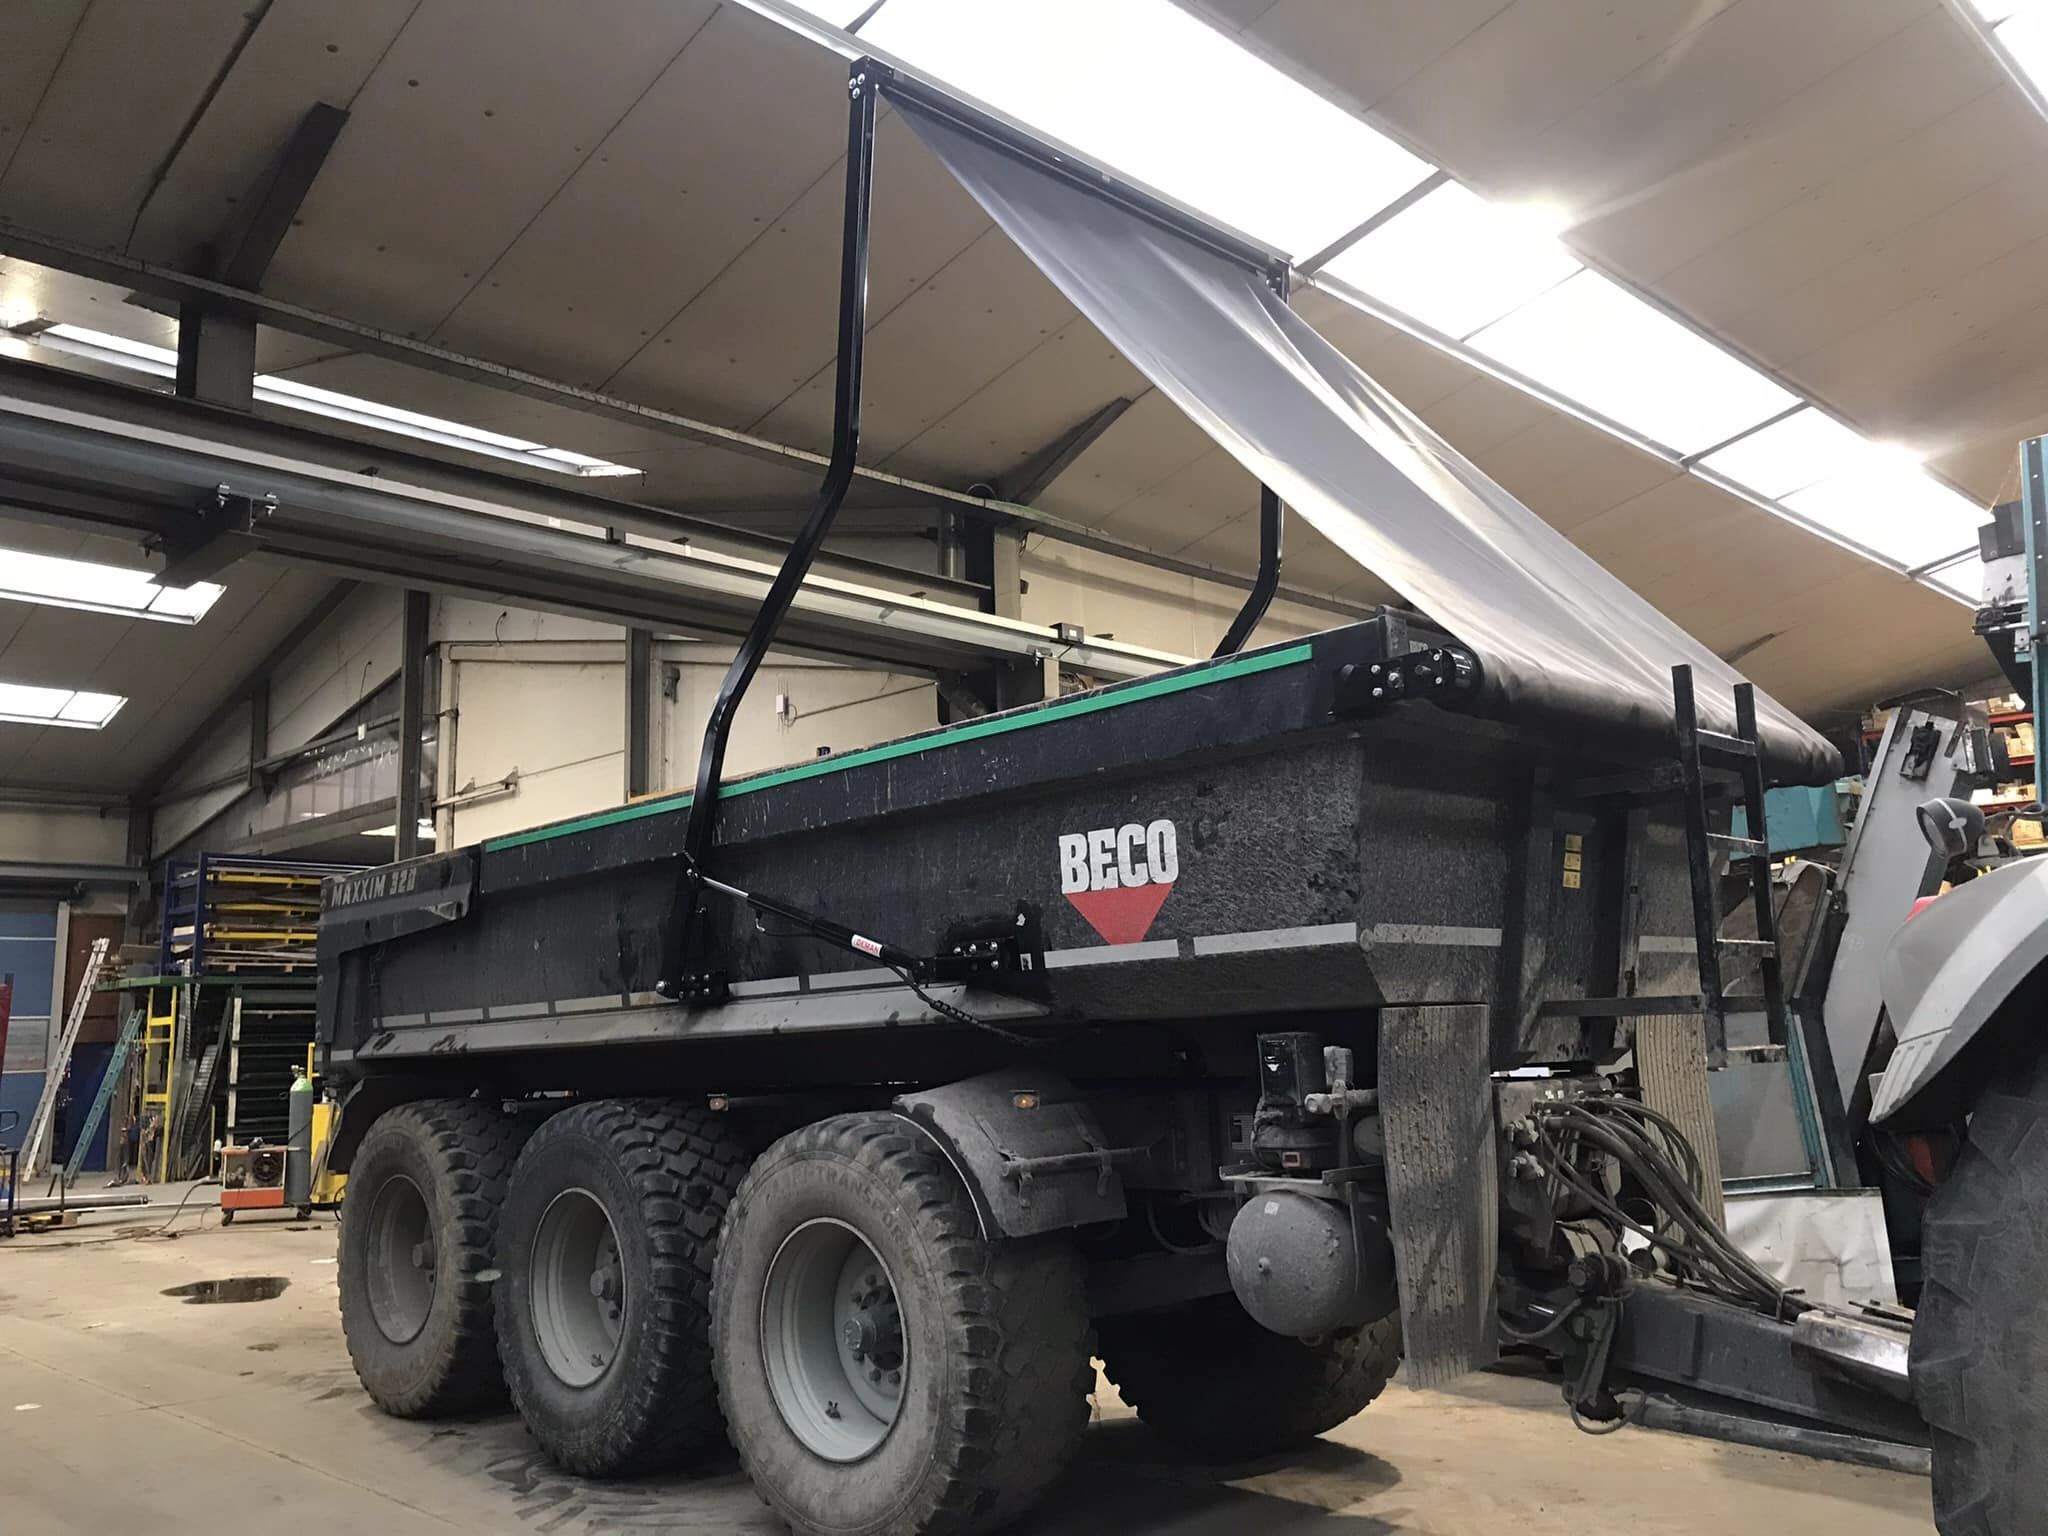 Deman hydraulic arms system puts cover roll over green loading bay in shed